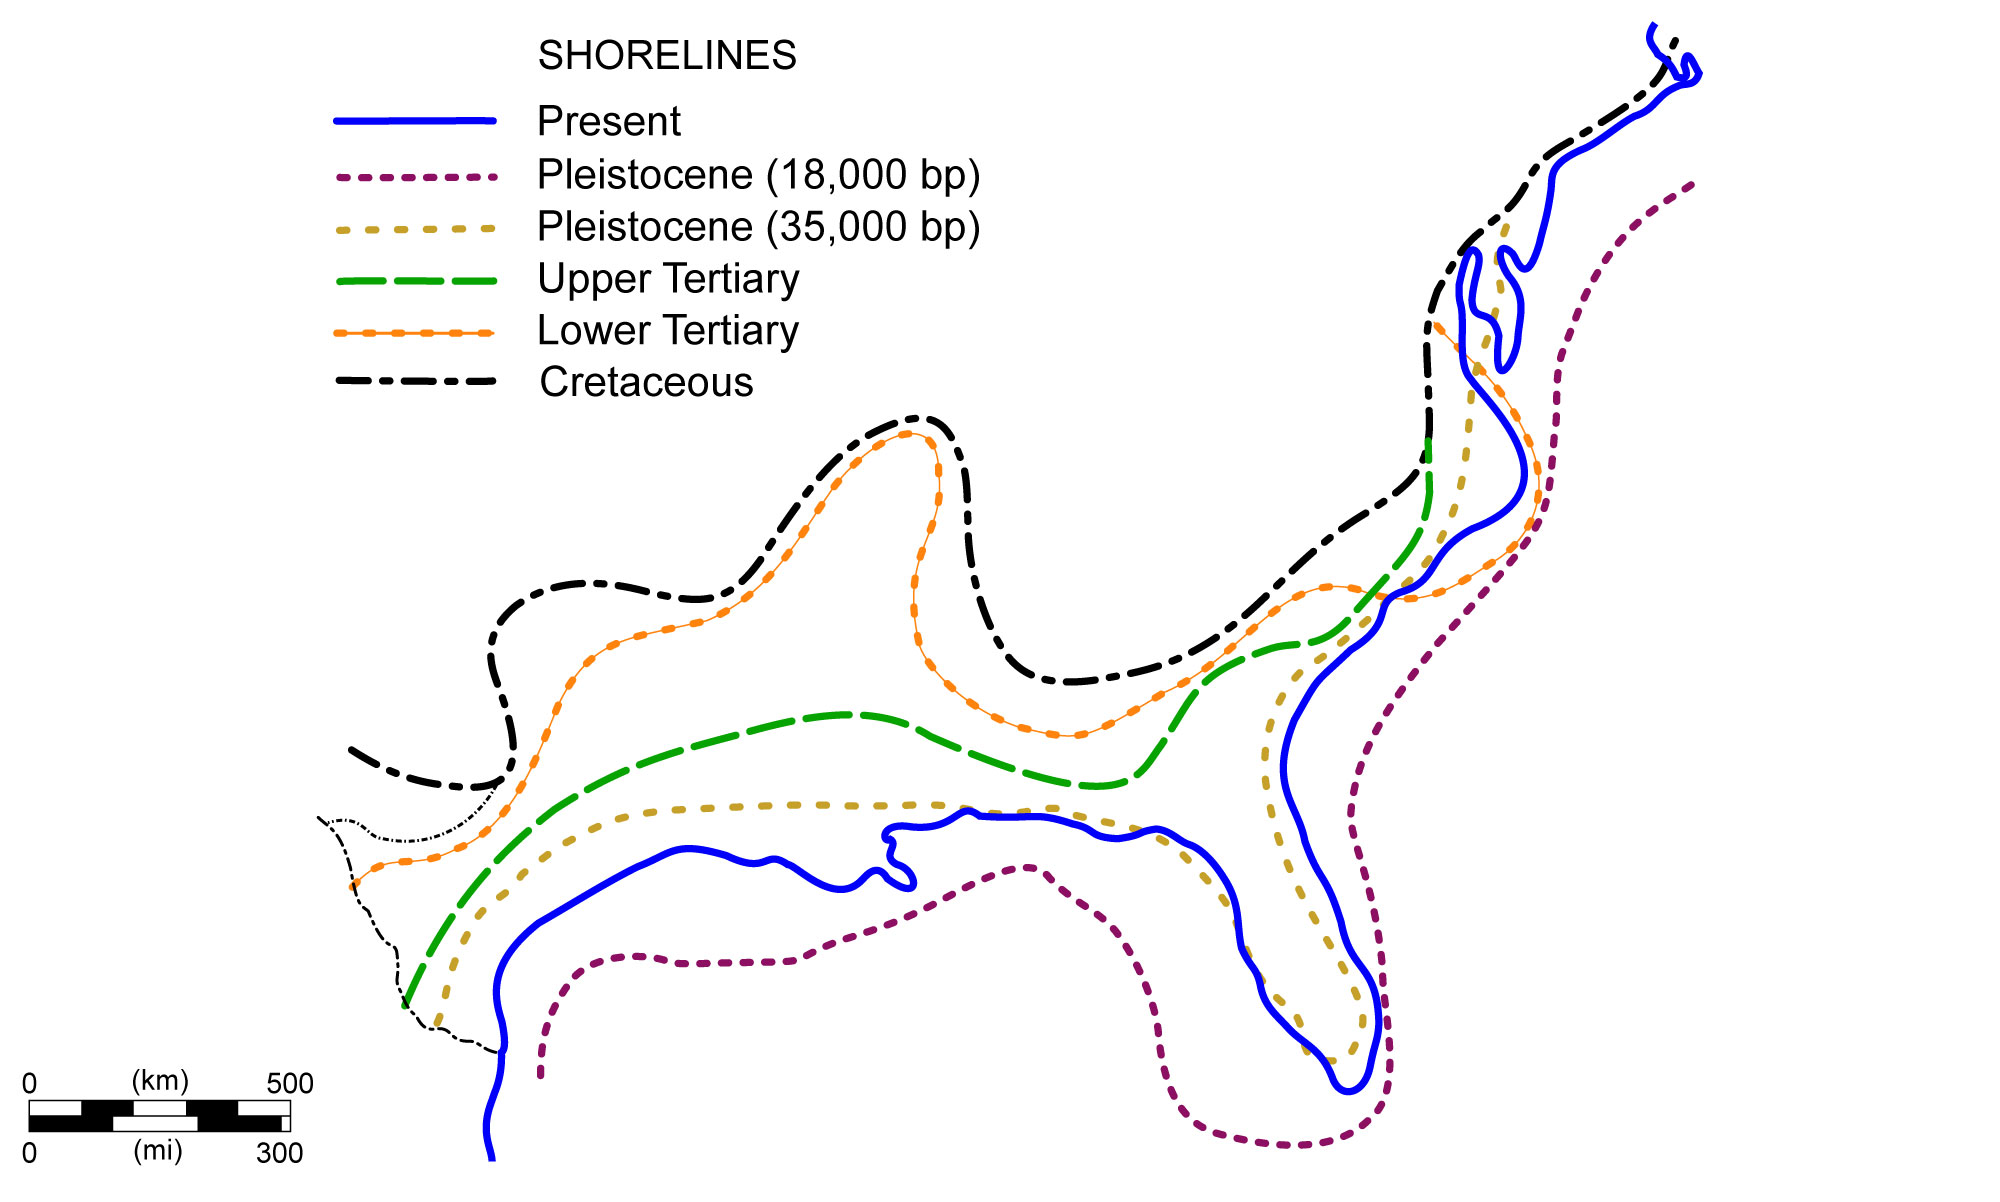 Simple map showing the locations of shorelines along the U.S. Coastal Plain at different times during the geologic past.